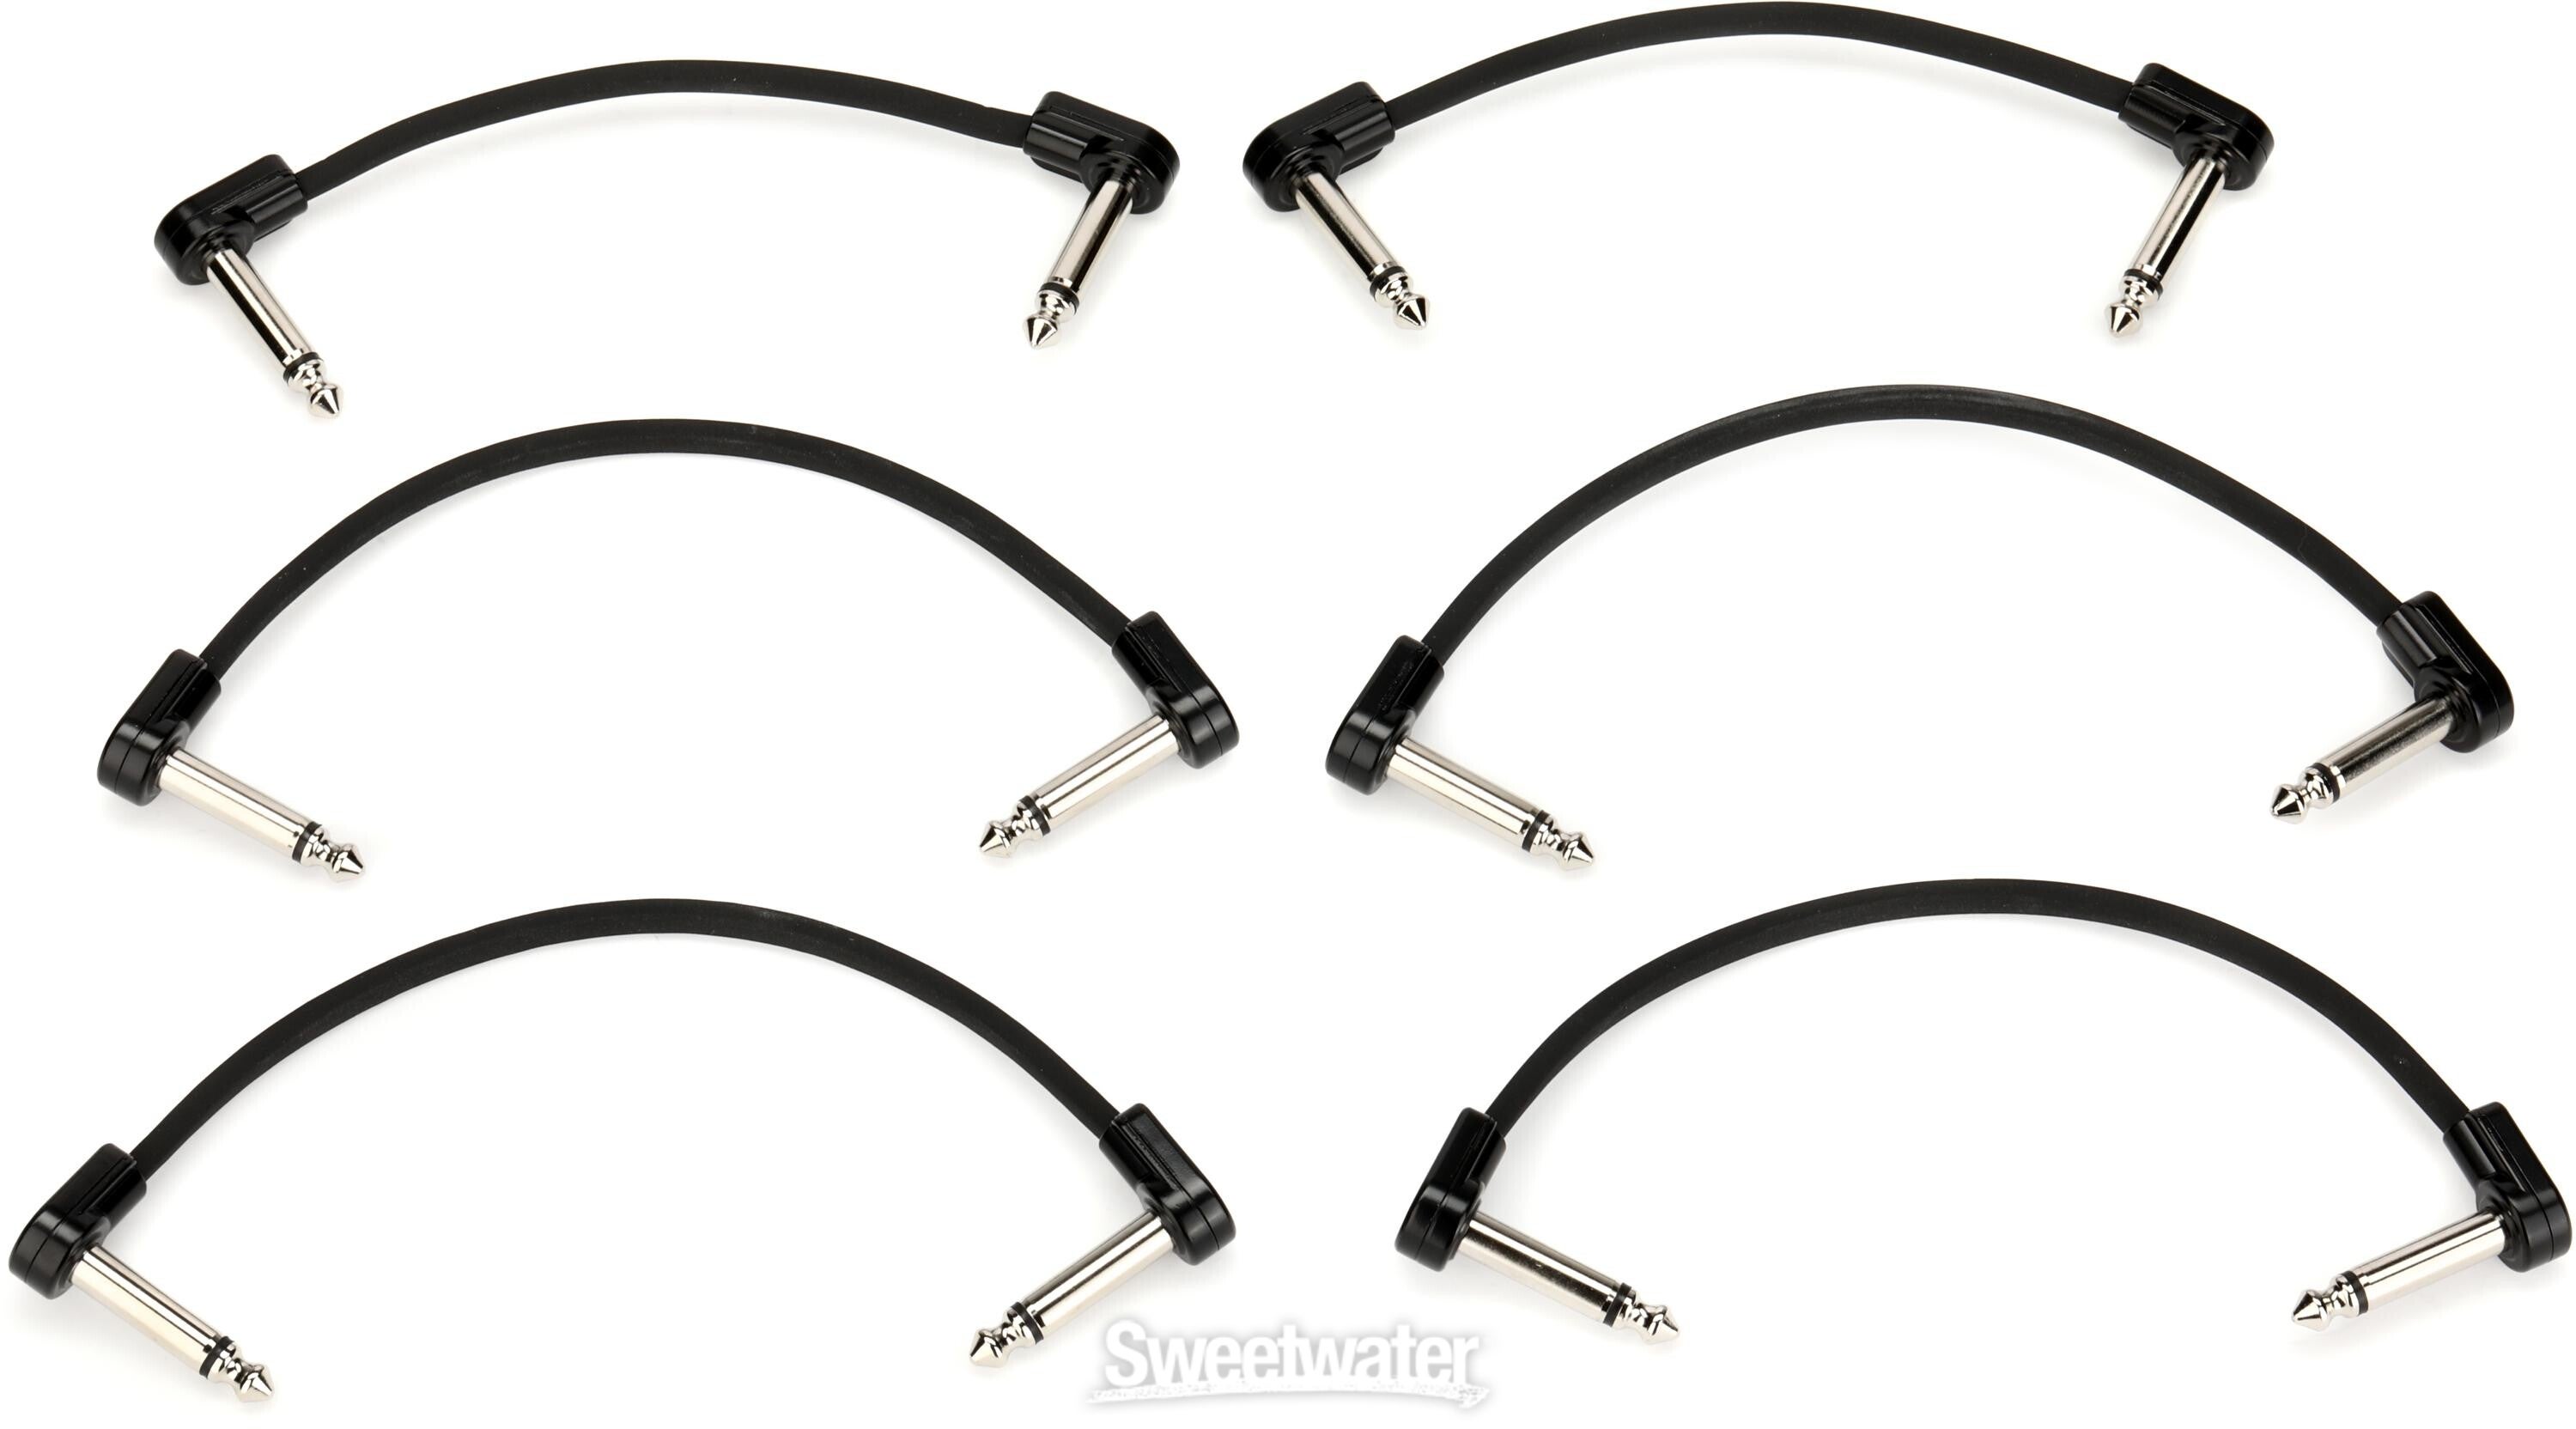 Fender Blockchain Patch Cable Kit - Right Angle to Right Angle